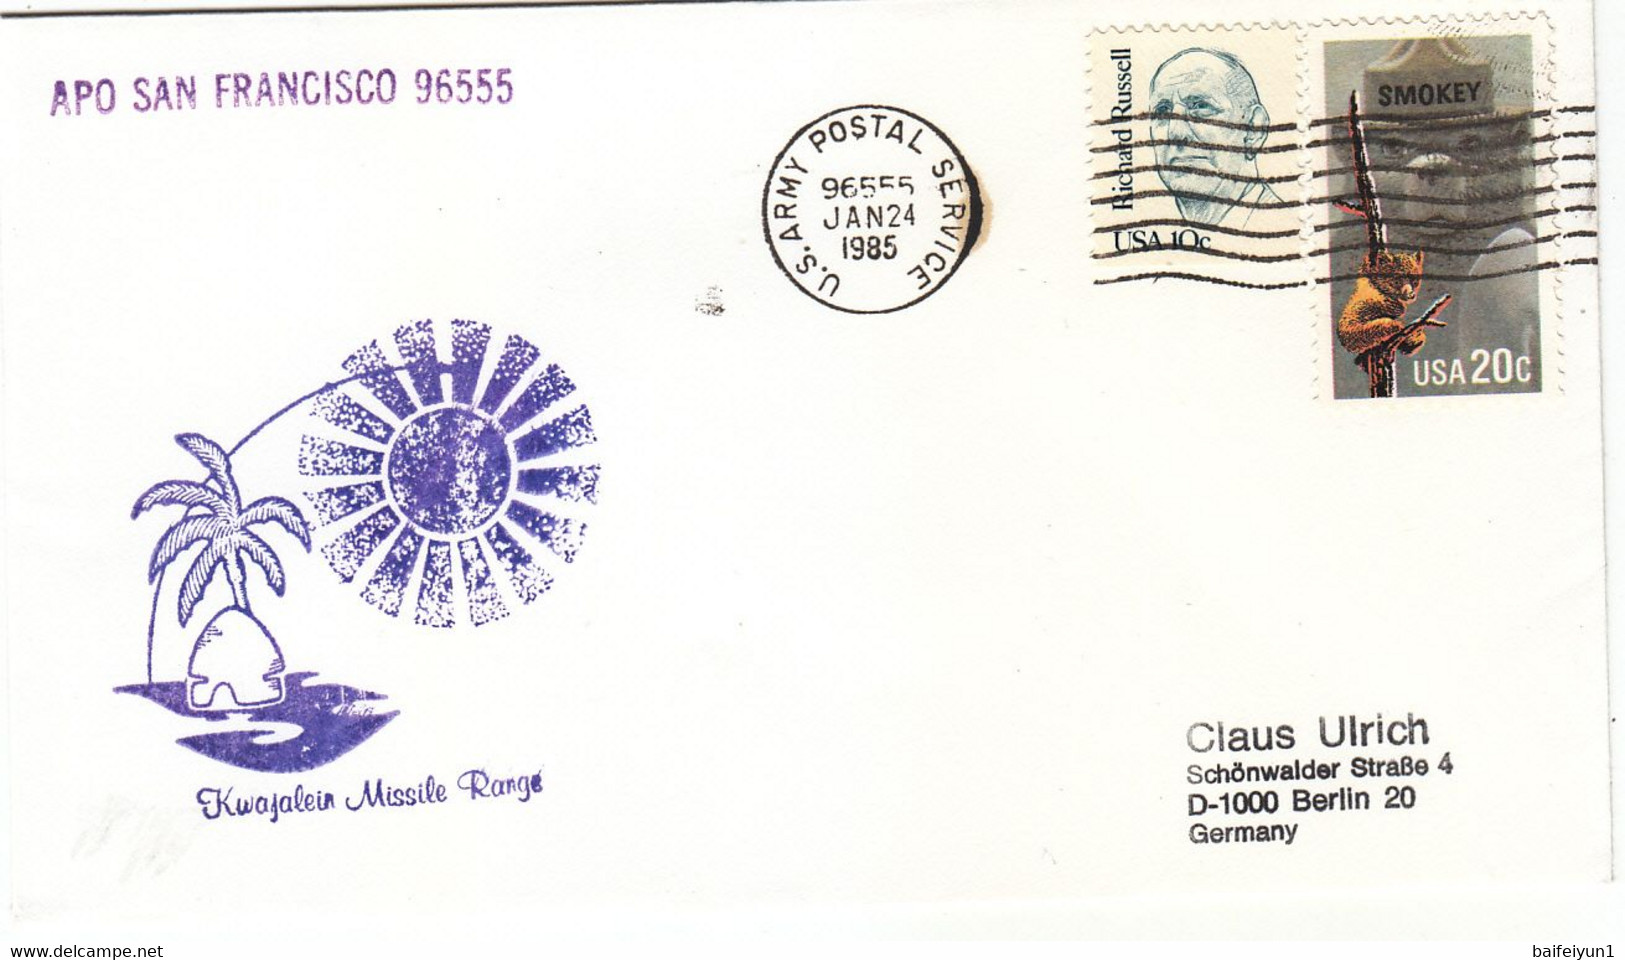 1985 USA  Space Shuttle Discovery STS-51C Mission And  Missile Range Commemorative Cover - Amérique Du Nord